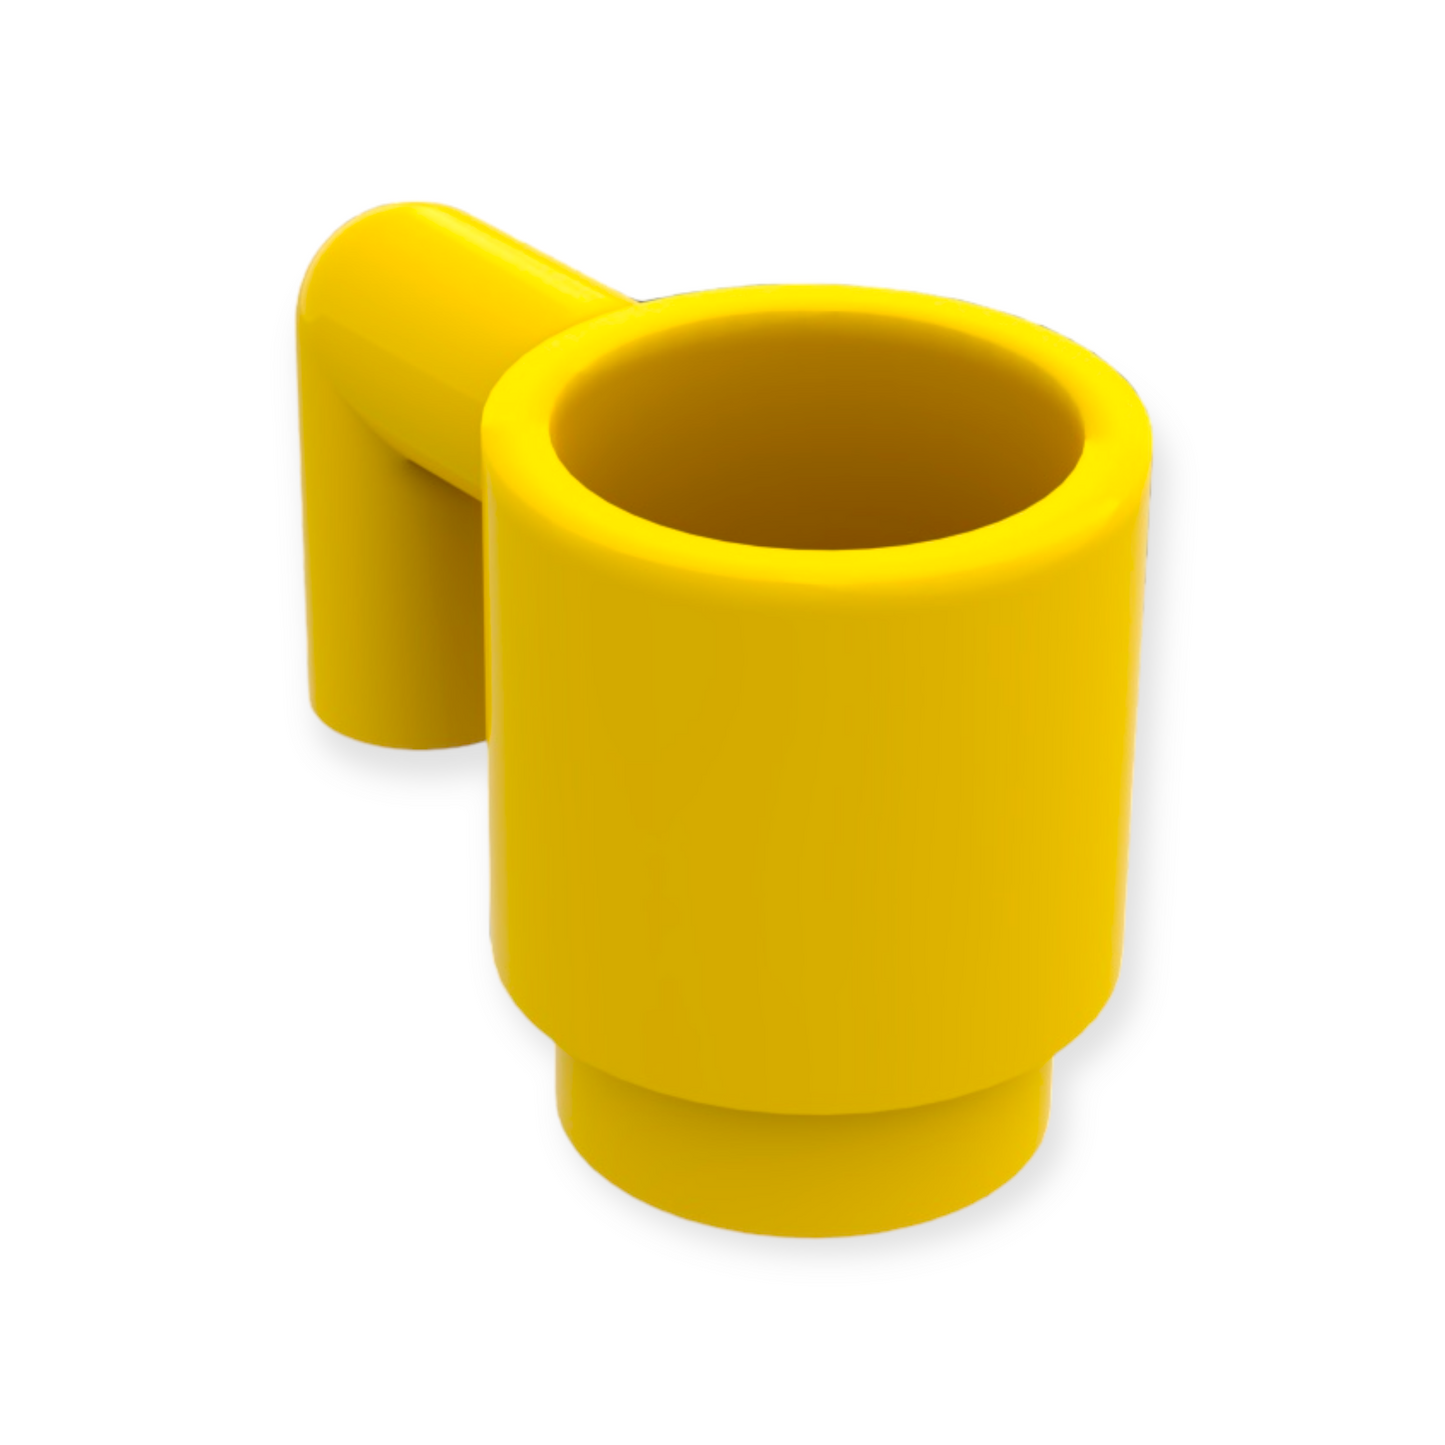 LEGO Tasse / Cup in Yellow